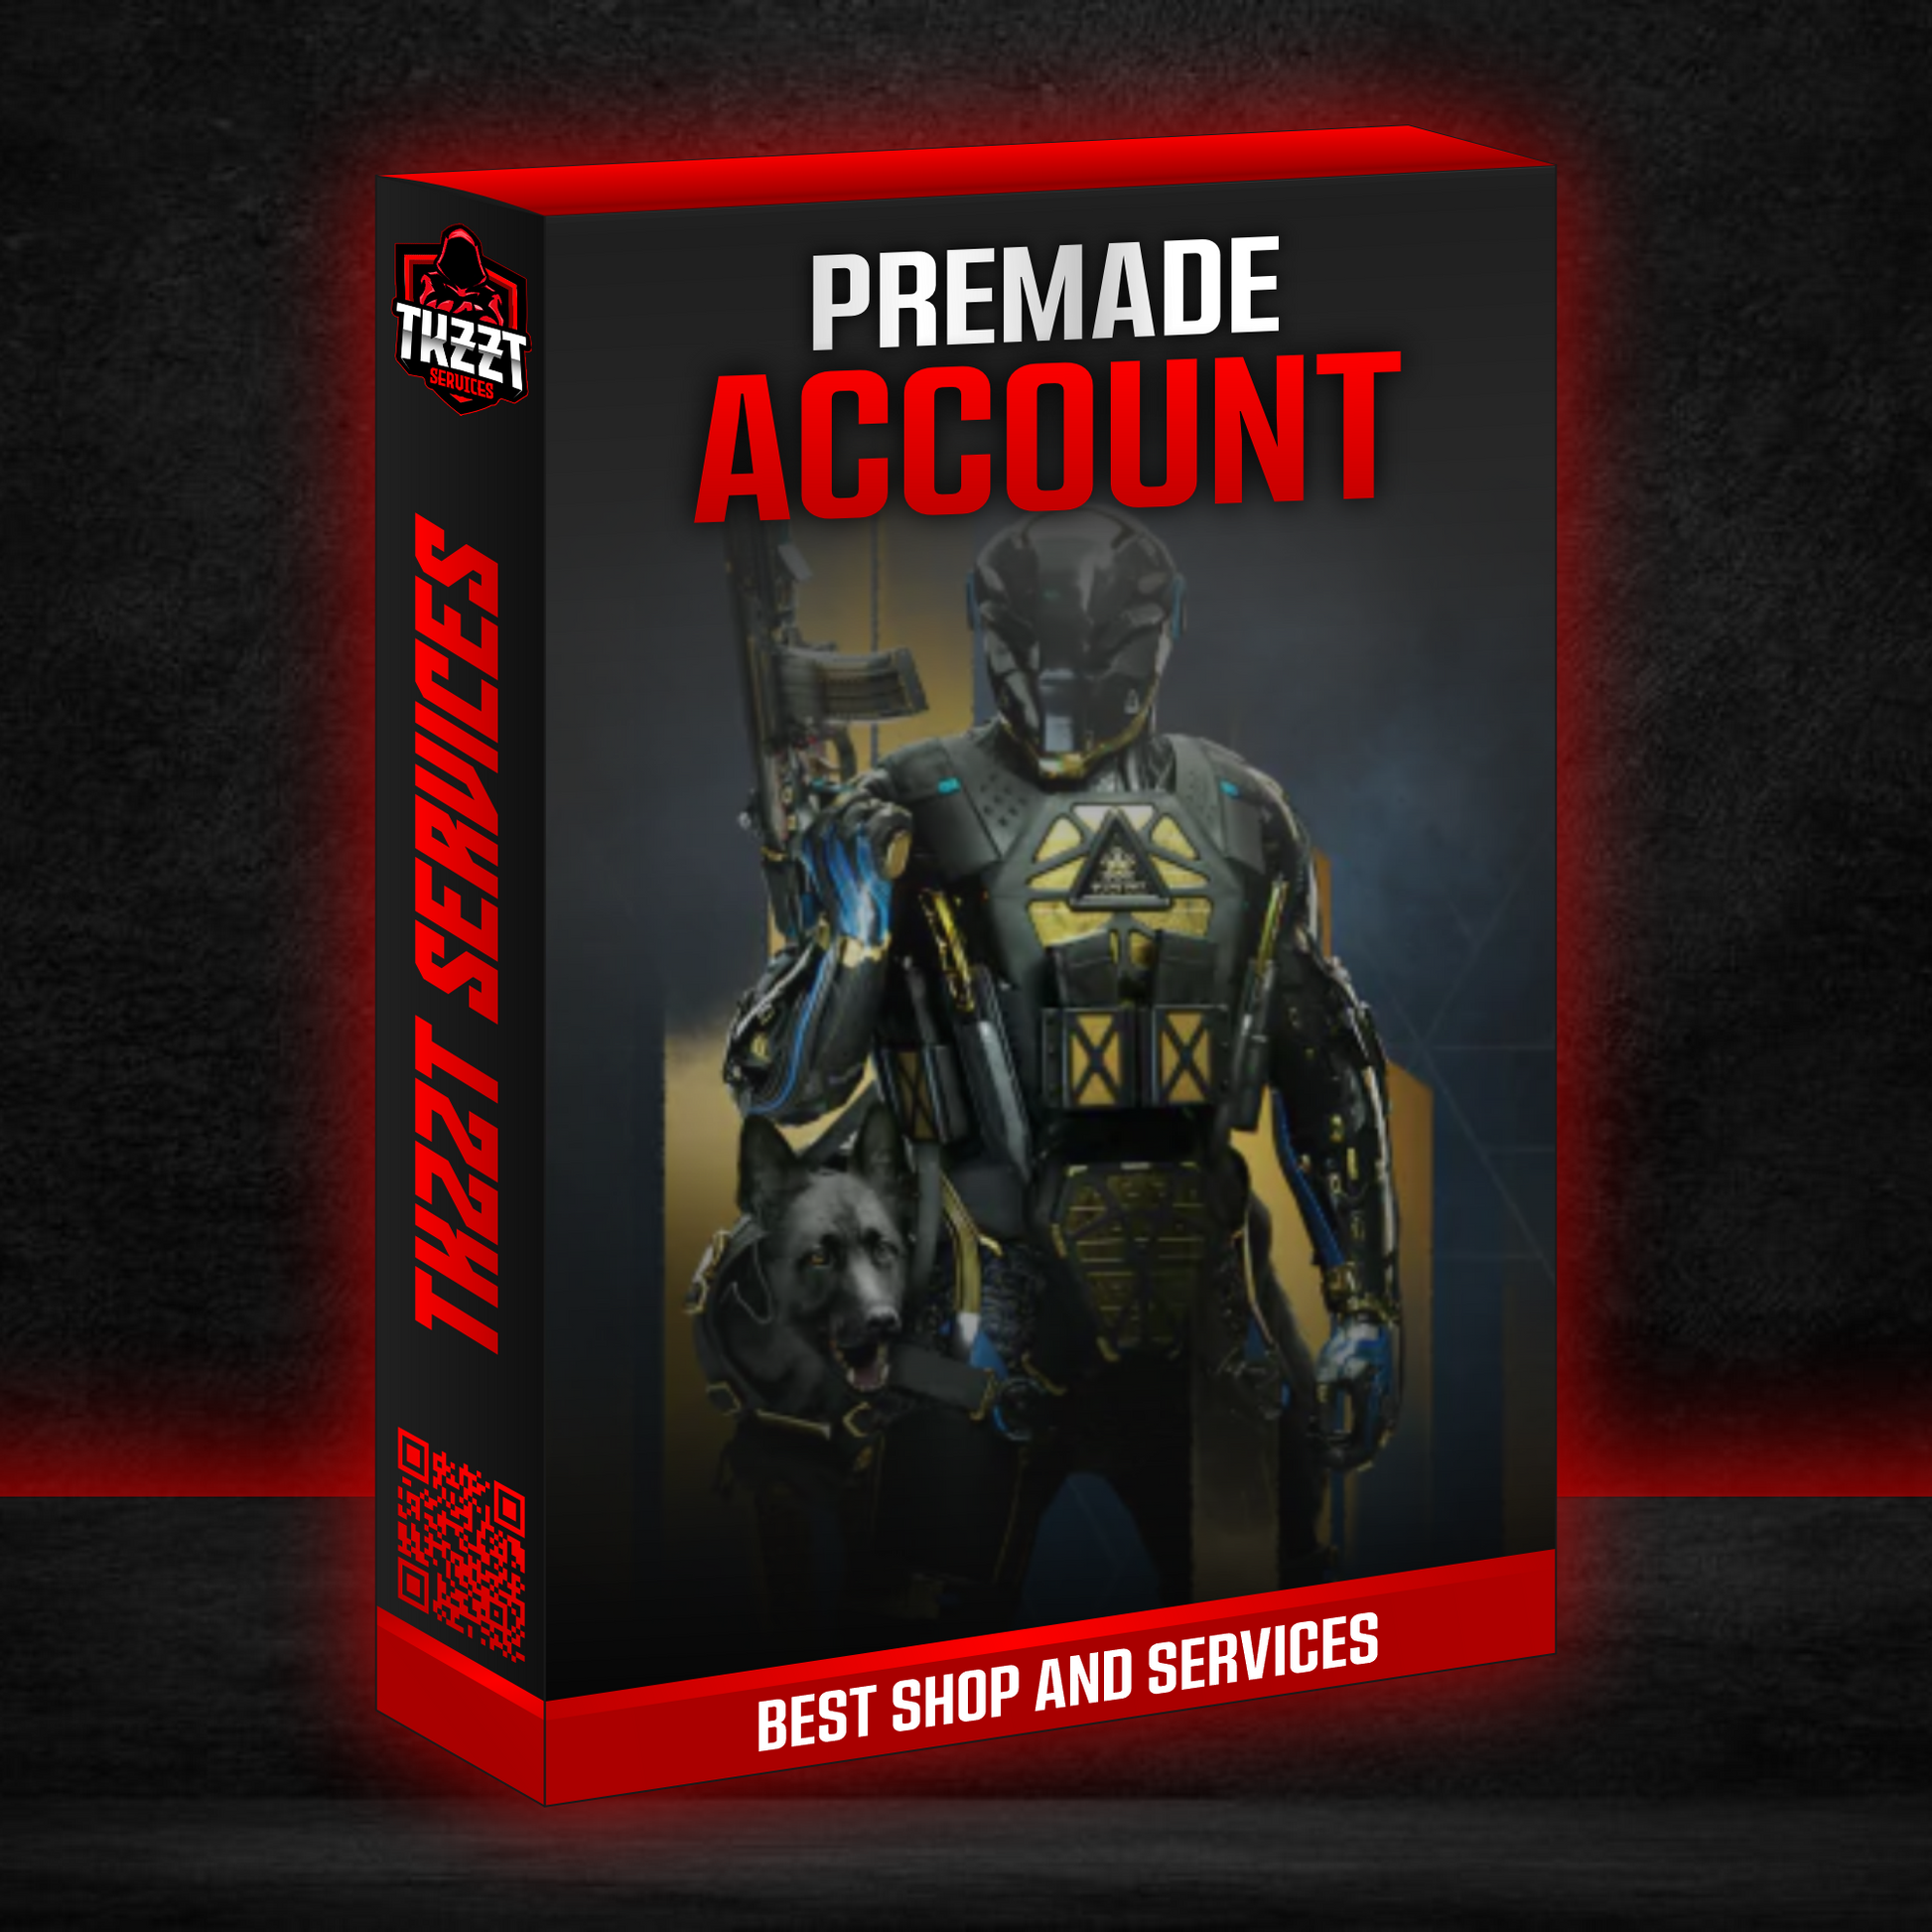 Premade Account: Console and PC Account with the best camos unlocked